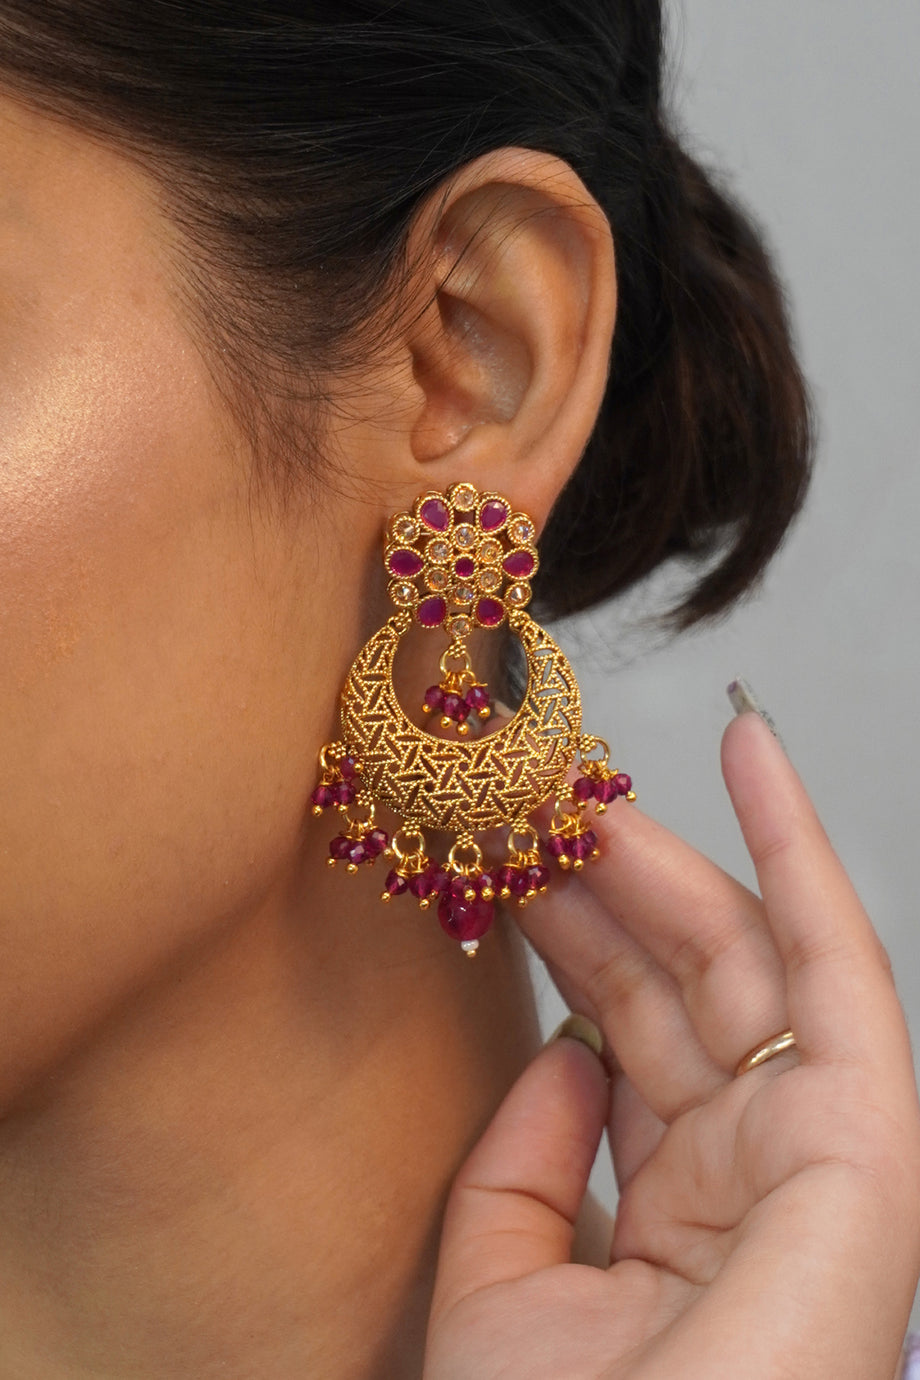 Stud Gold earring Designs Daily Wear With Weight And Price 2023 || Shridhi  Vlog | Gold earrings models, Gold earrings, Gold earrings designs